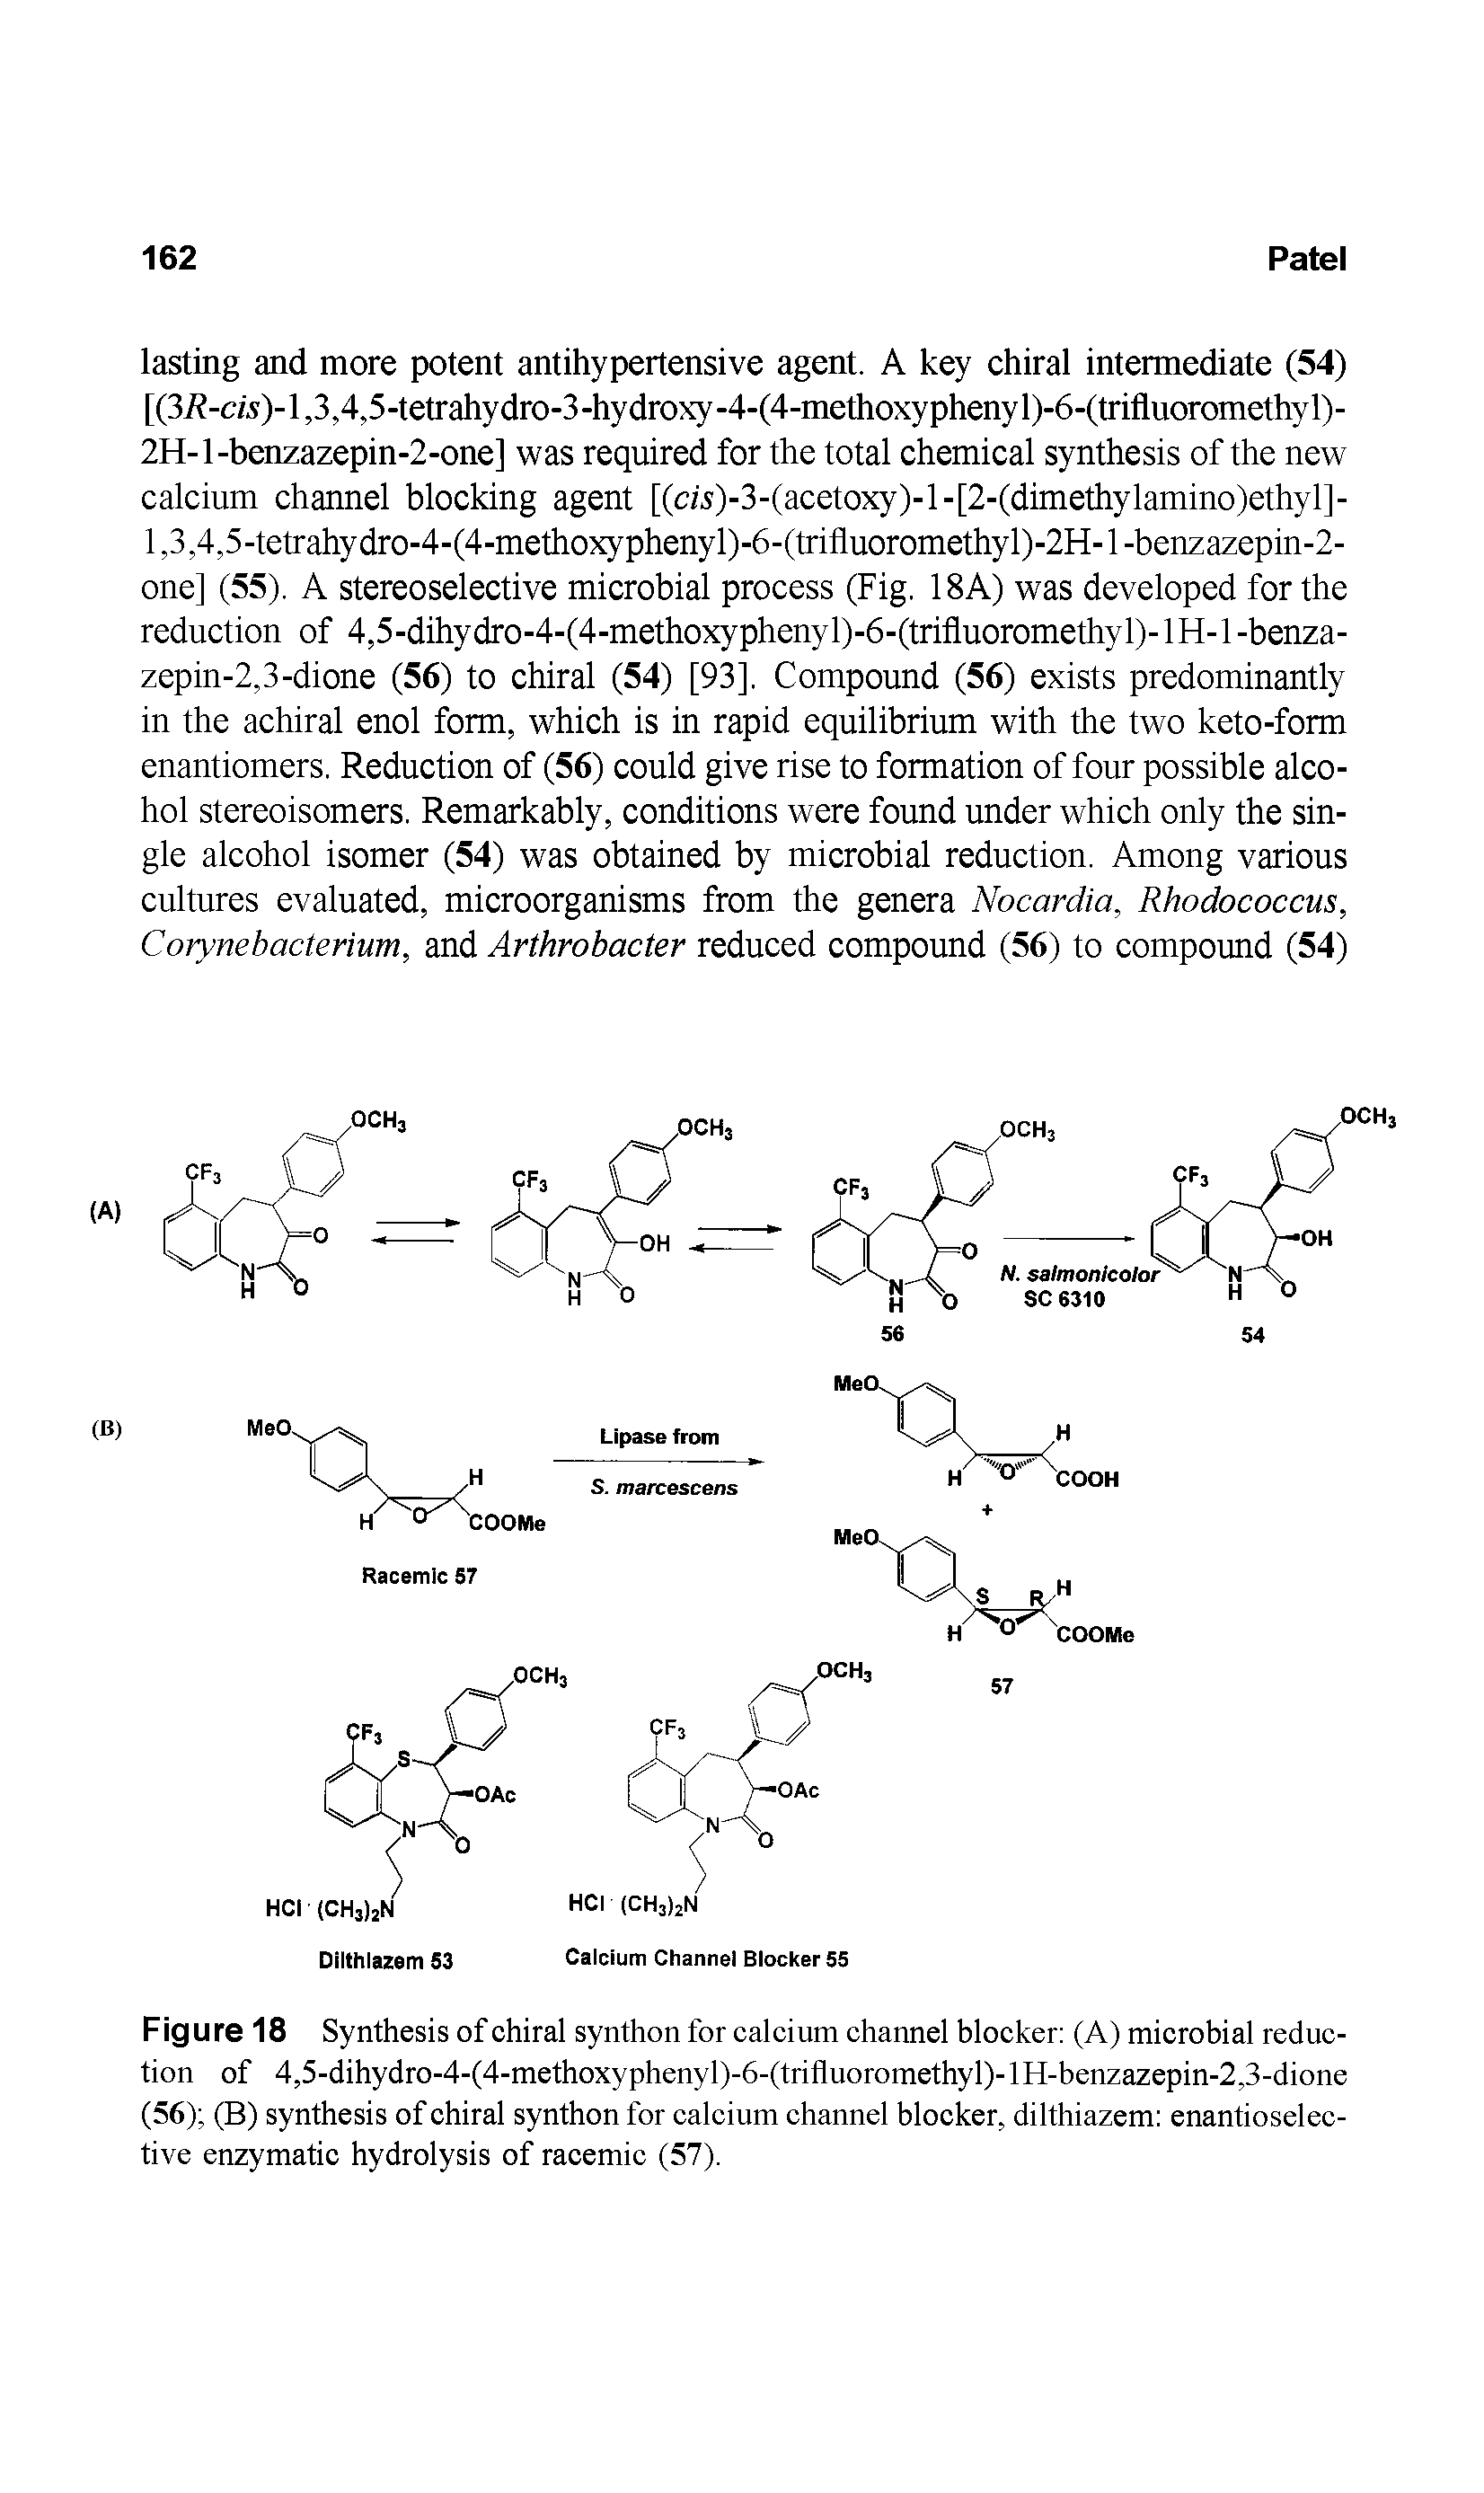 Figure 18 Synthesis of chiral synthon for calcium channel blocker (A) microbial reduction of 4,5-dihydro-4-(4-methoxyphenyl)-6-(trifluoromethyl)-lH-benzazepin-2,3-dione (56) (B) synthesis of chiral synthon for calcium channel blocker, dilthiazem enantioselec-tive enzymatic hydrolysis of racemic (57).